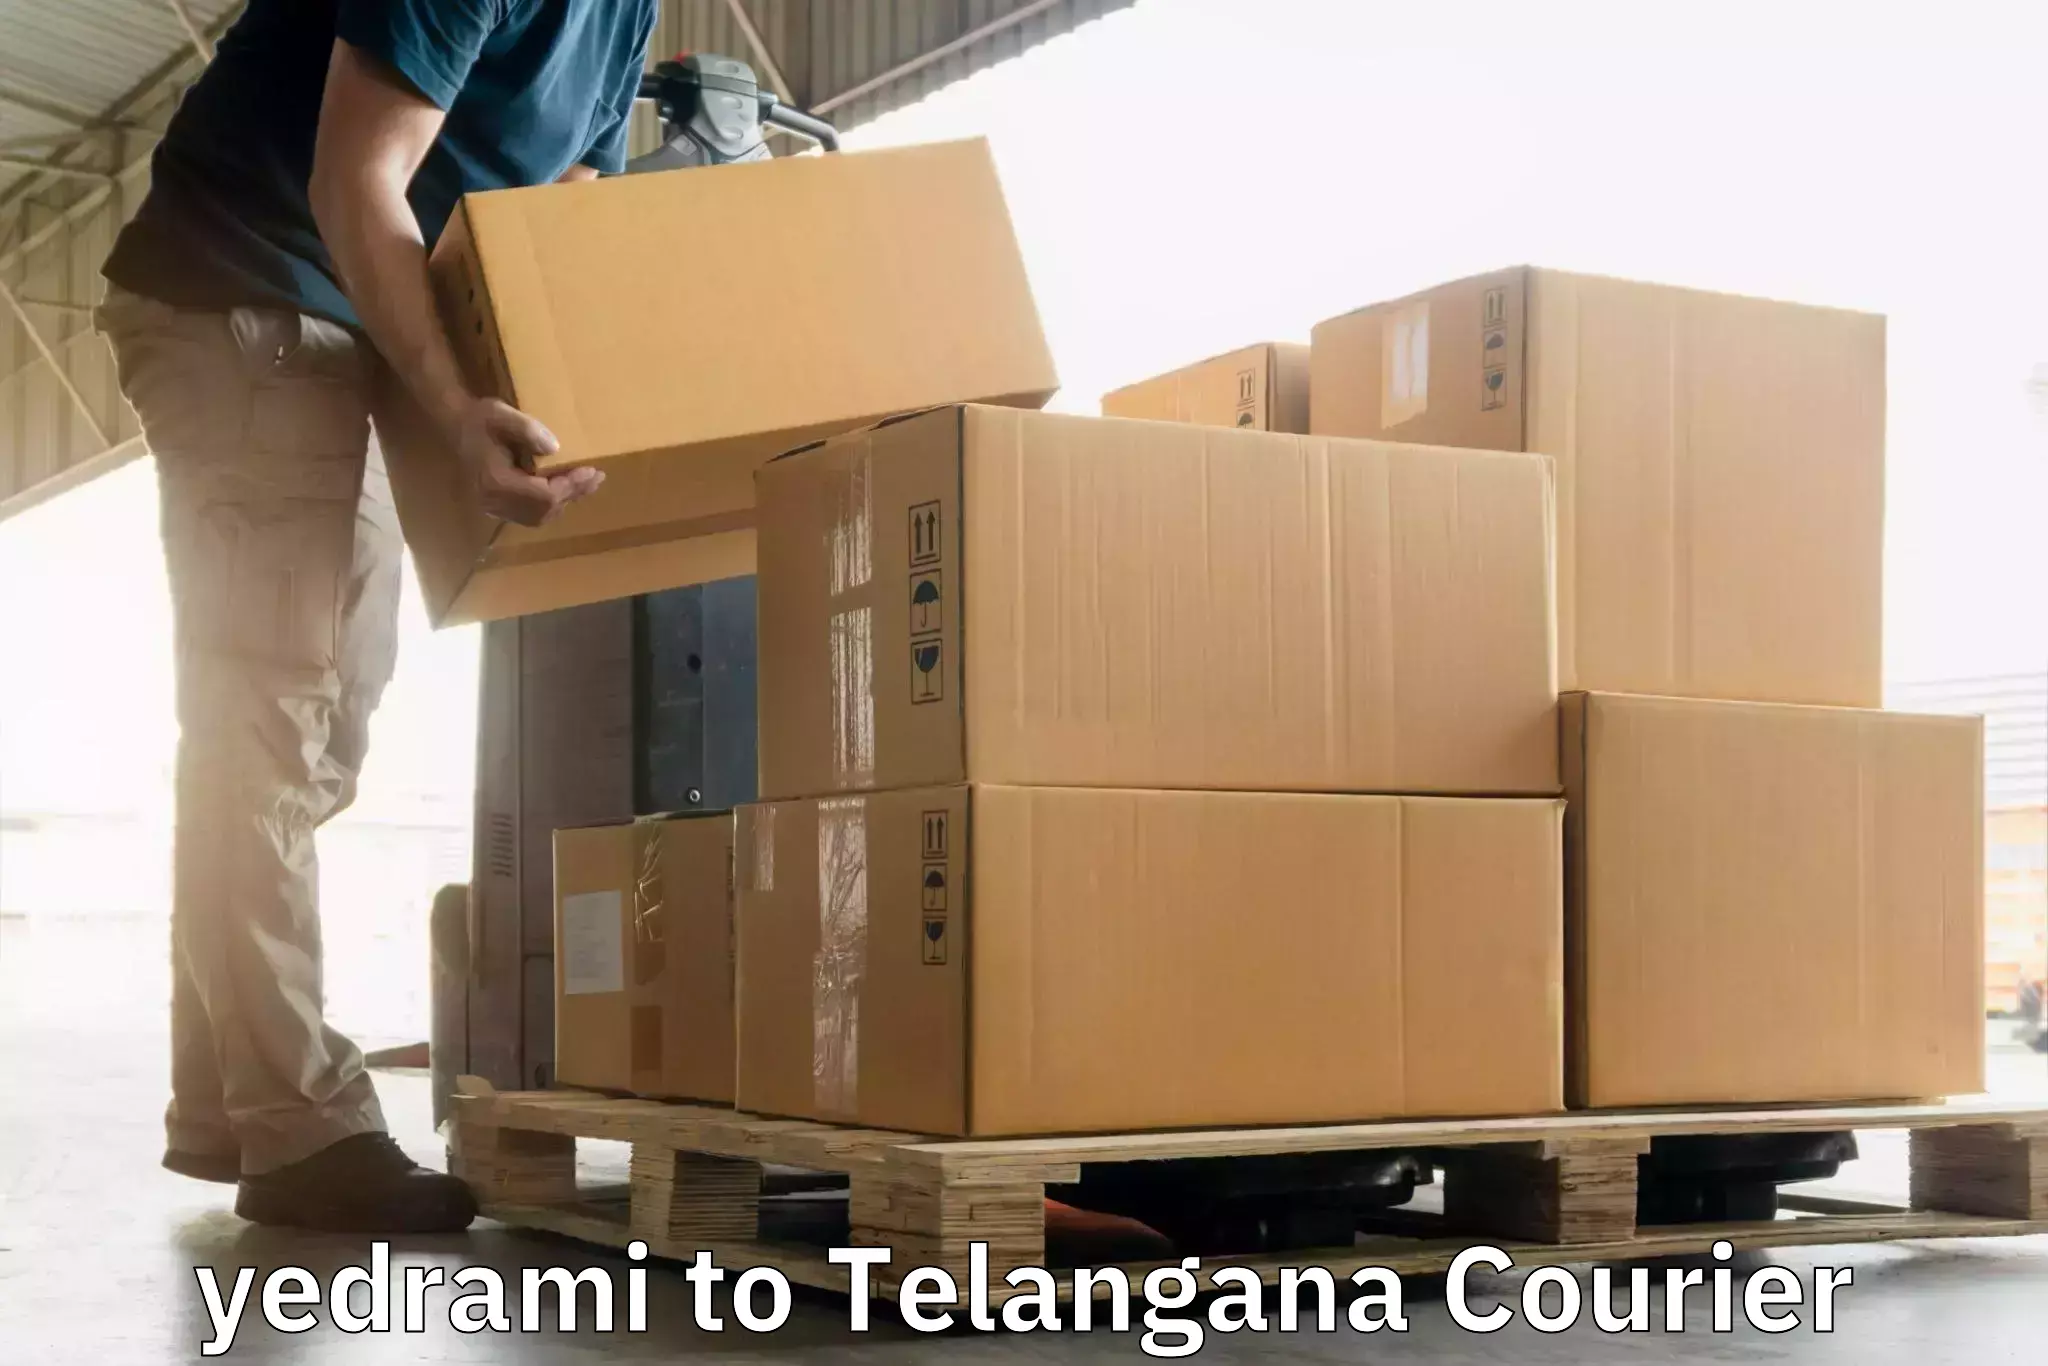 Multi-national courier services yedrami to Telangana